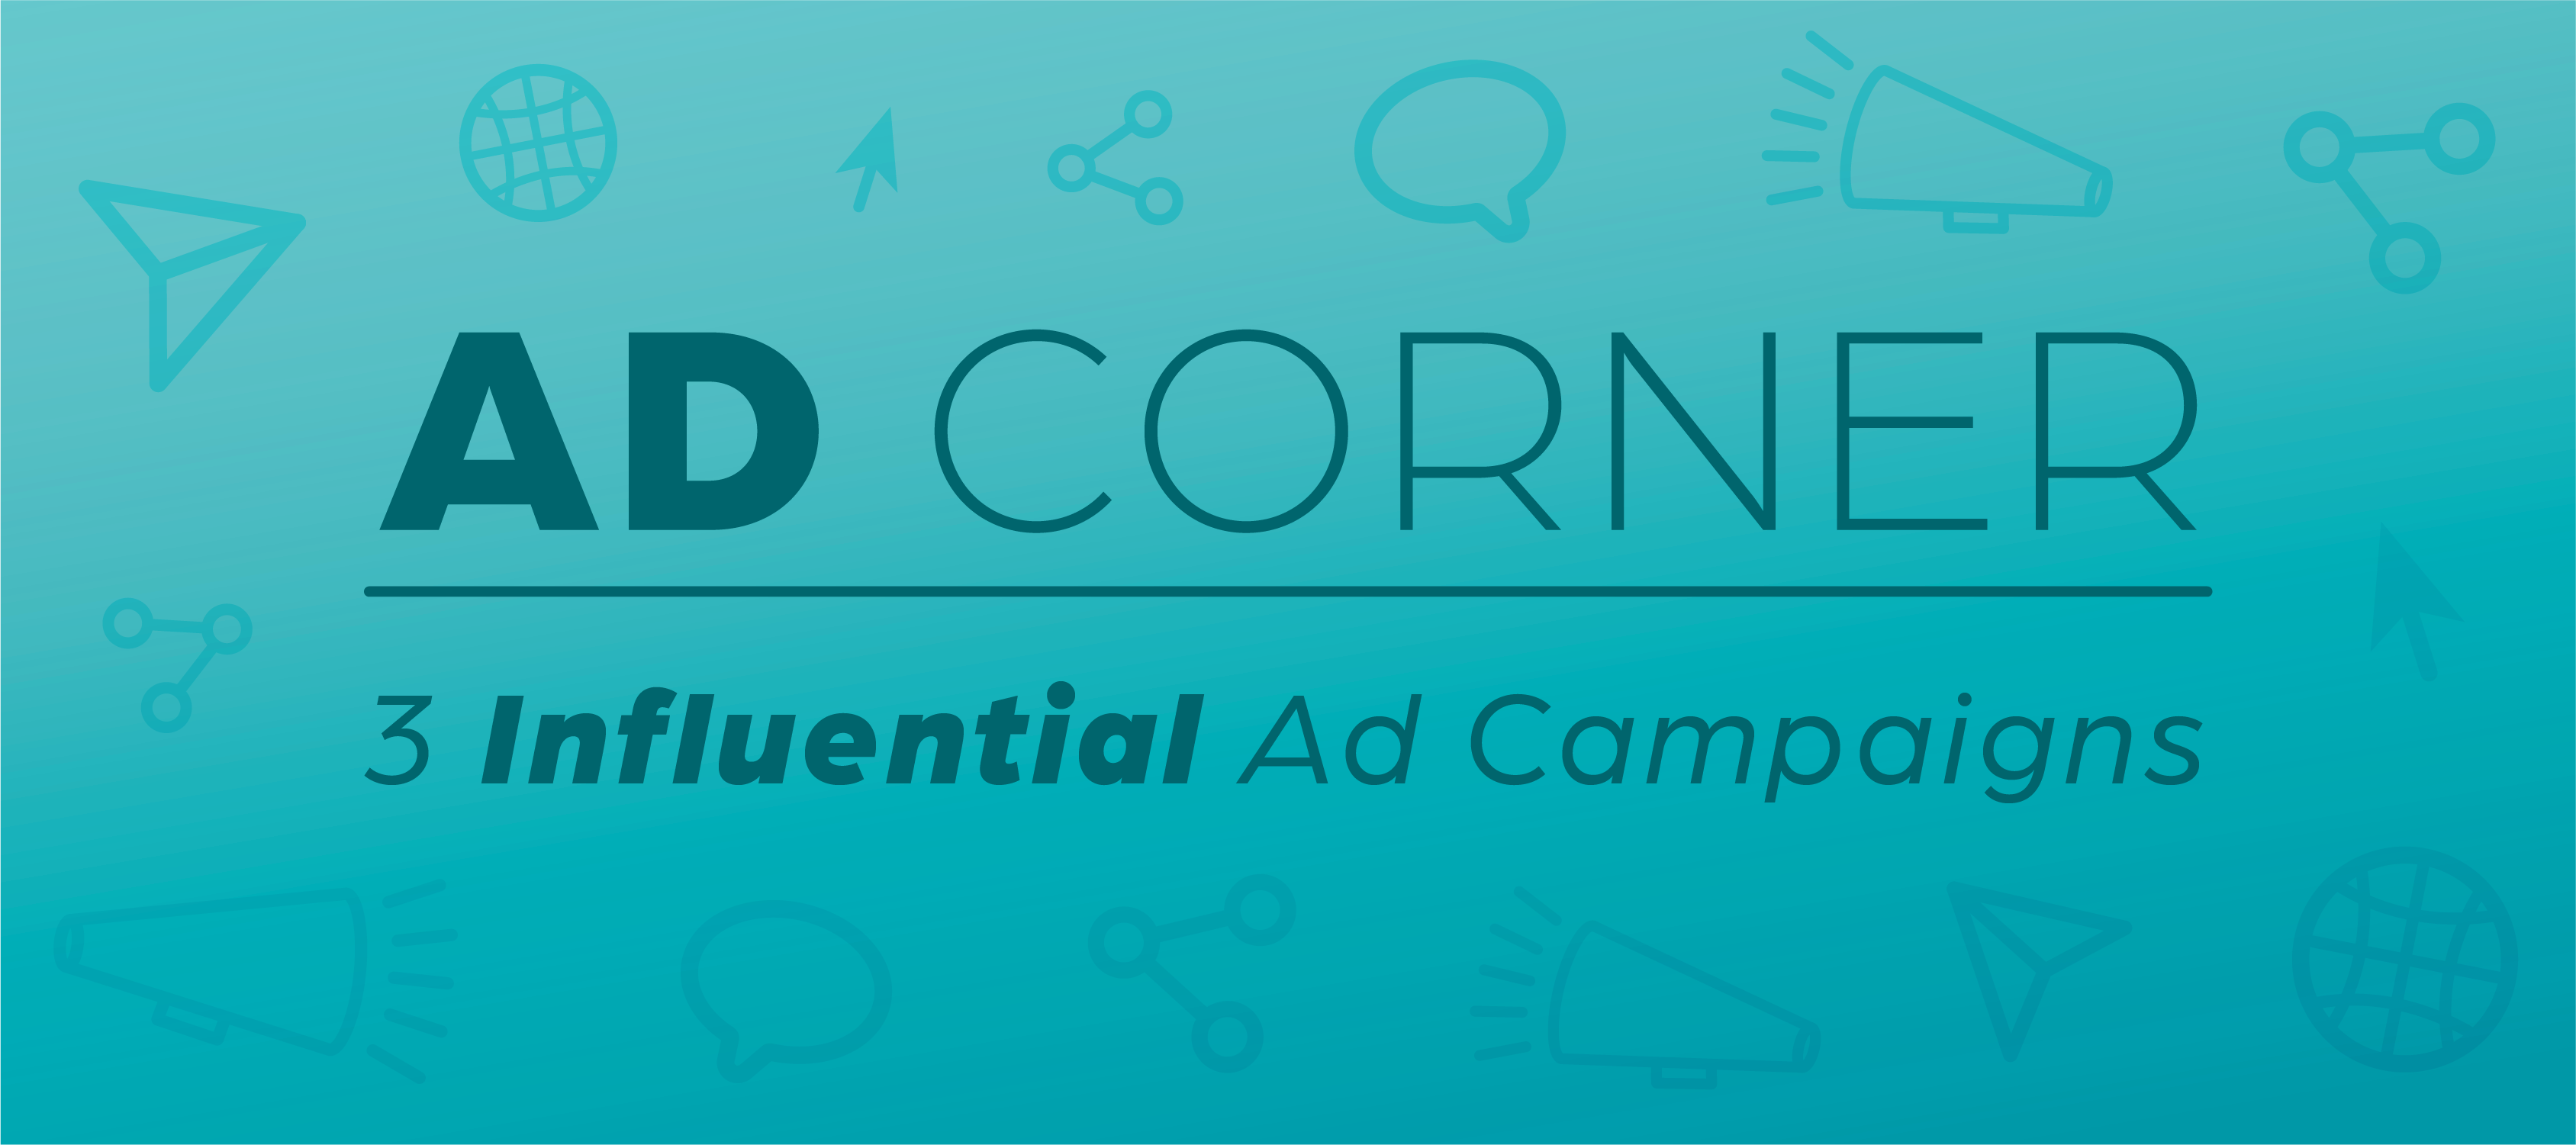 Header image that says "Ad Corner: 3 Influential Ad Campaigns"